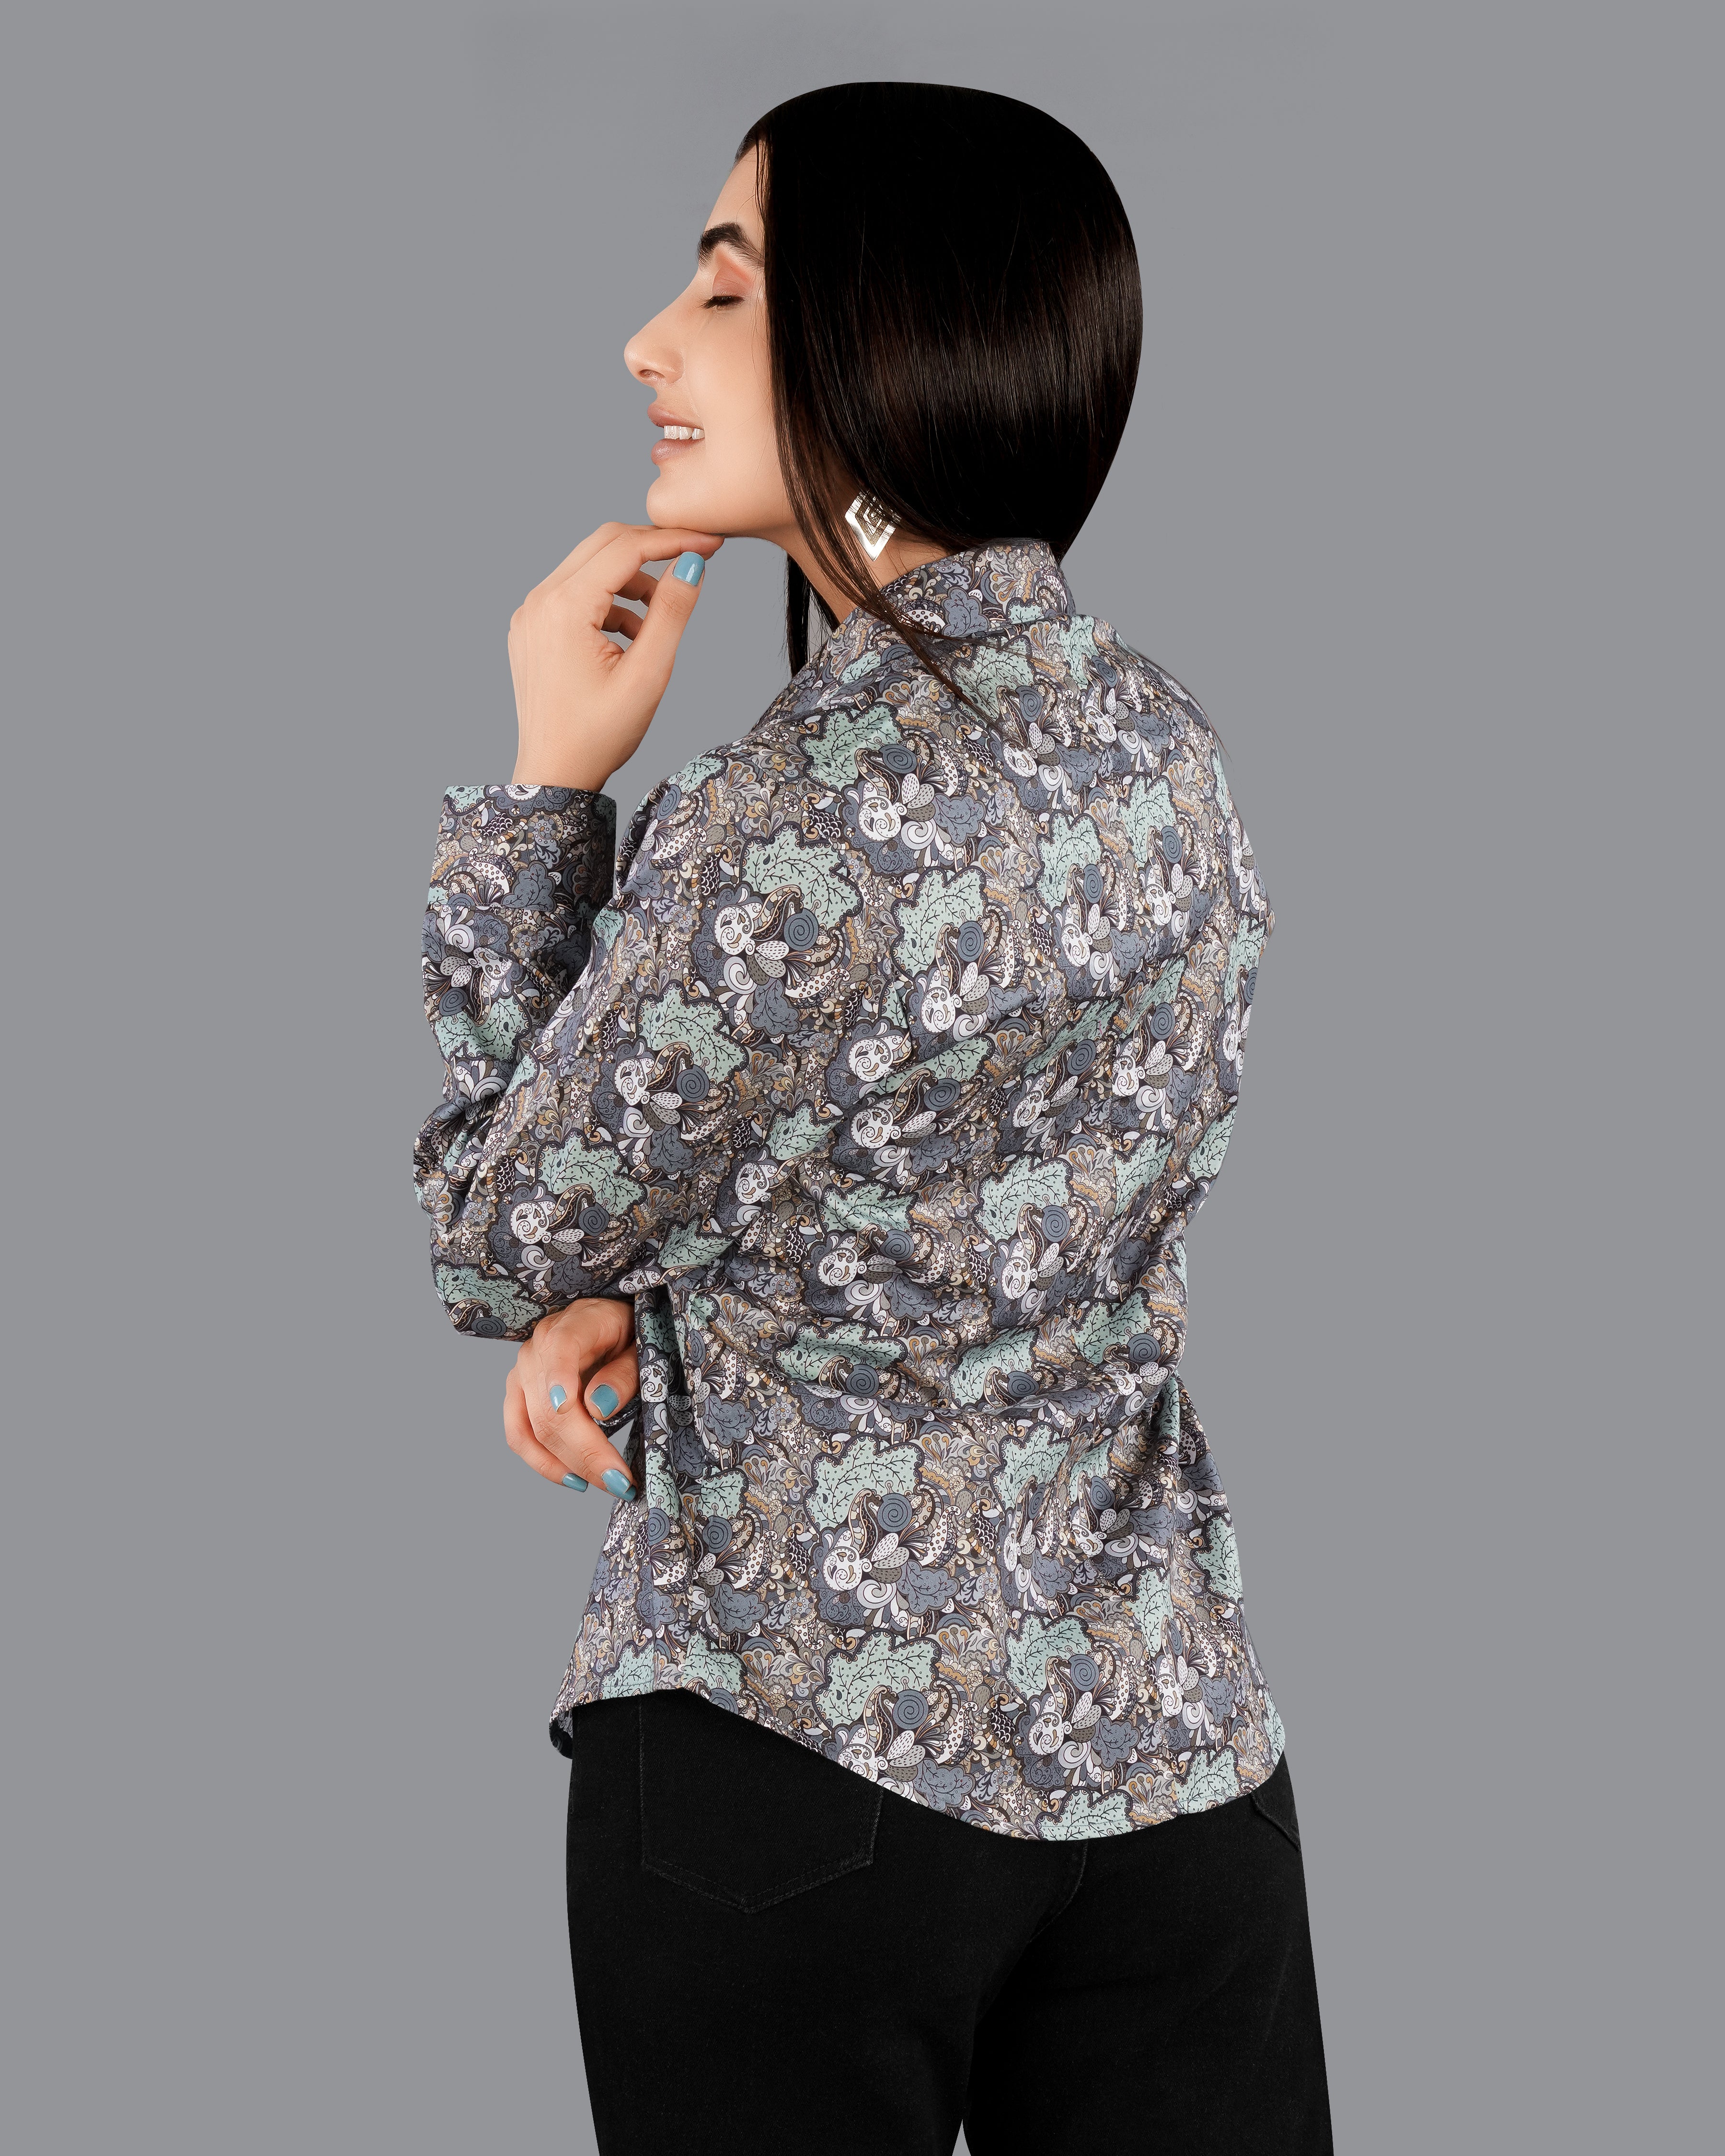 Pewter Green with Storm Gray Quirky Printed Premium Cotton Shirt WS031-CC-32, WS031-CC-34, WS031-CC-36, WS031-CC-38, WS031-CC-40, WS031-CC-42